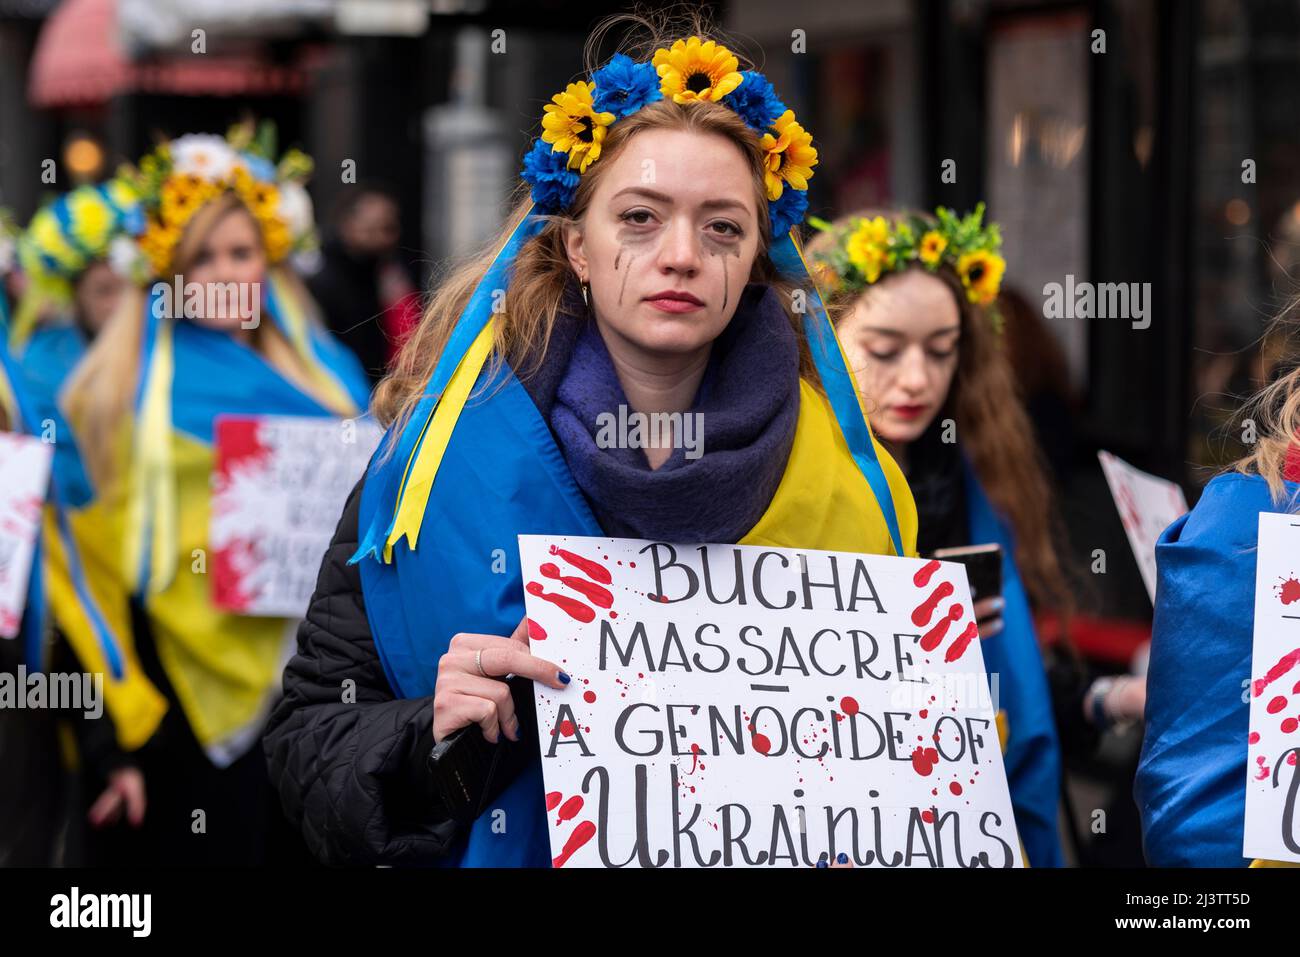 Protesters carrying out a die-in and protest, referencing the killed Ukraine civilians in towns such as Bucha during war with Russia. Bloodied sign Stock Photo